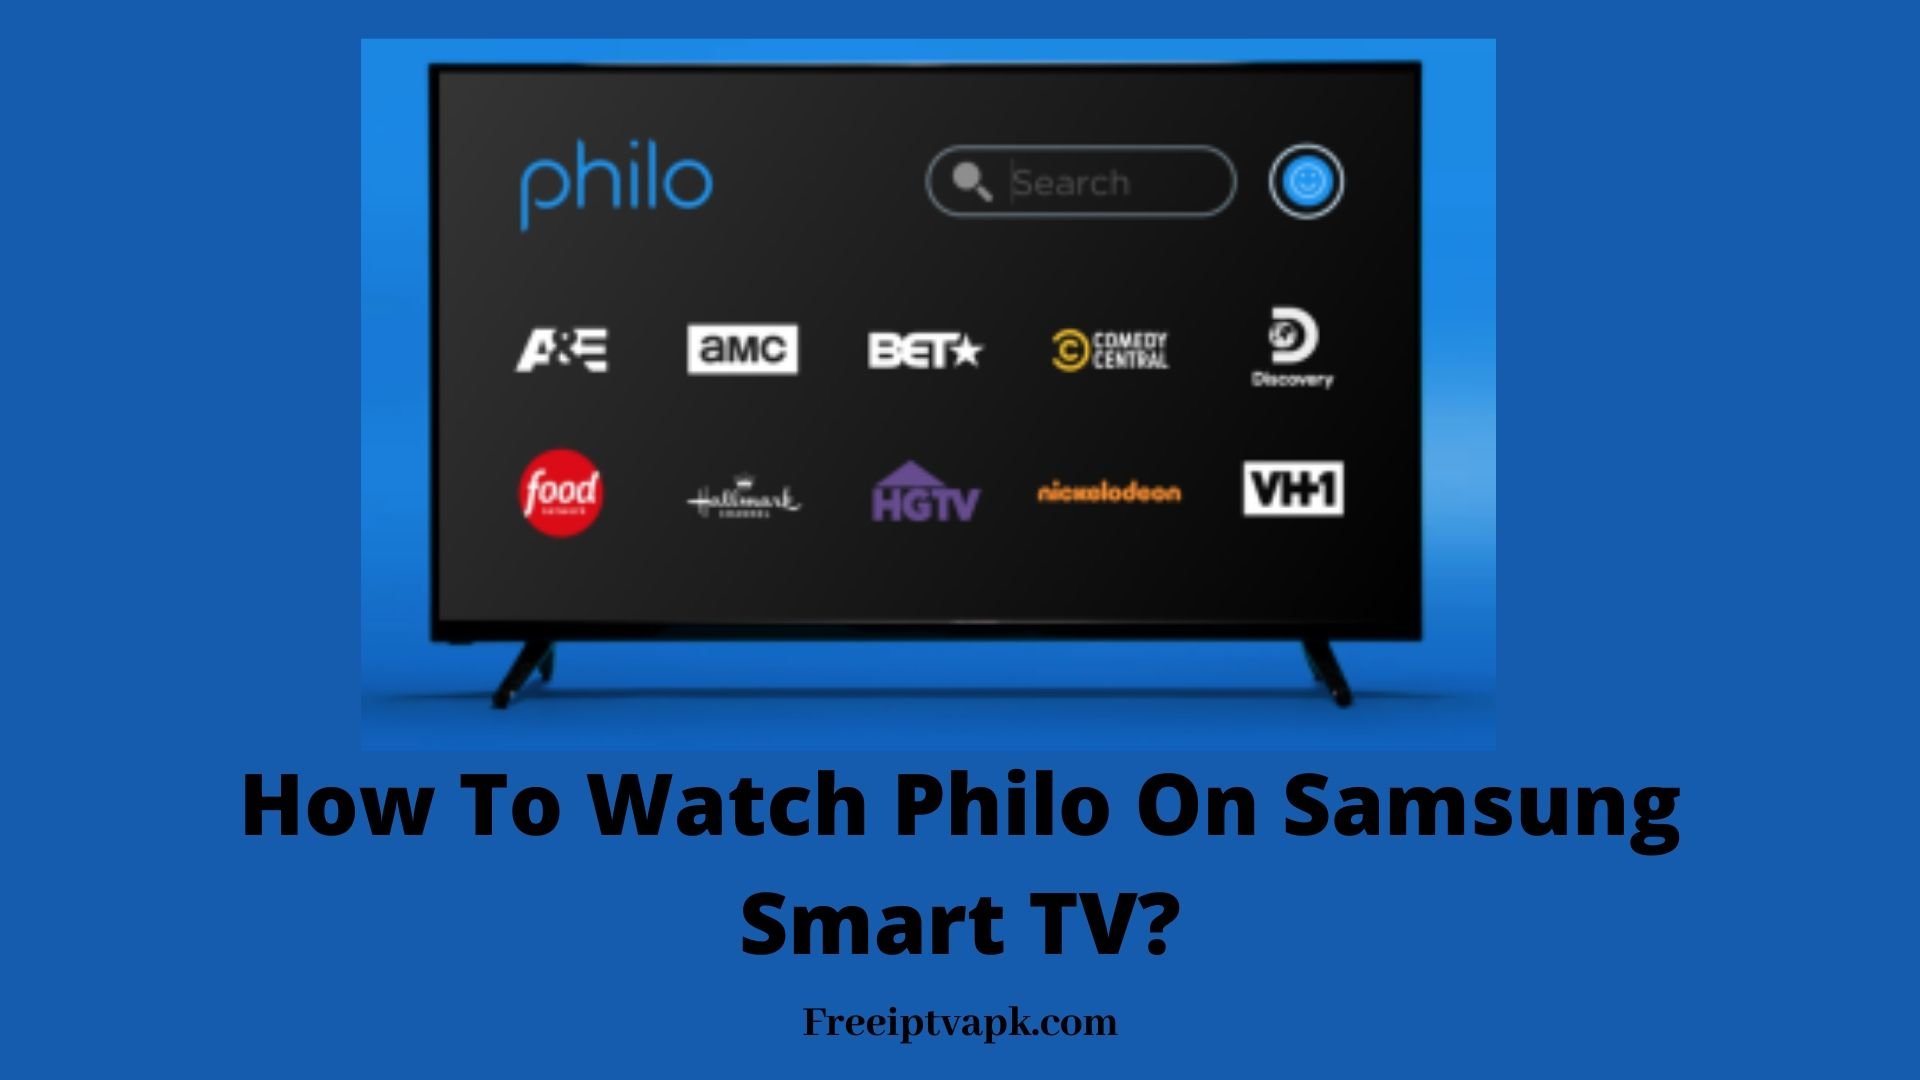 How To Watch Philo On Samsung Smart TV?